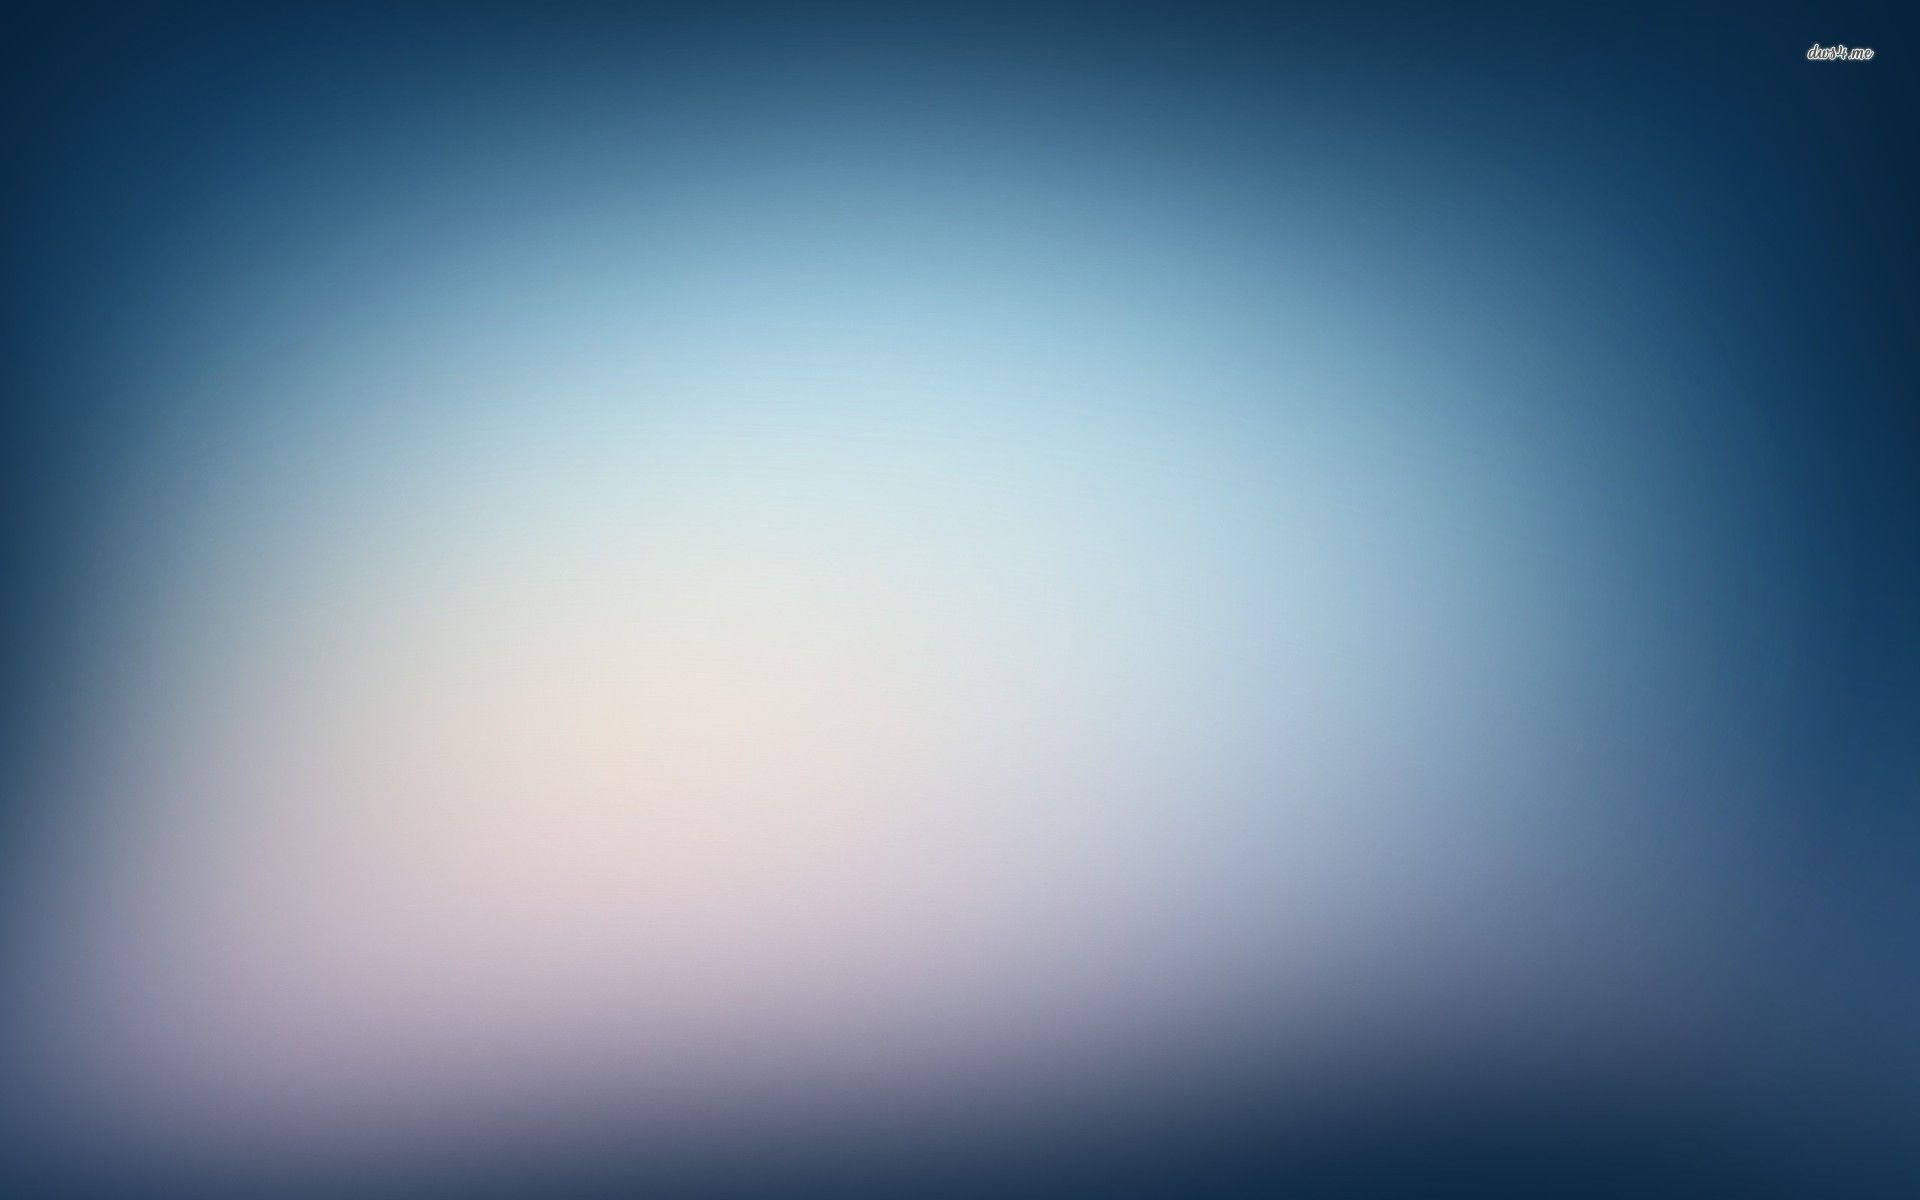 Tint Make Gradient Wallpaper Android Apps on Google Play 1920x1200